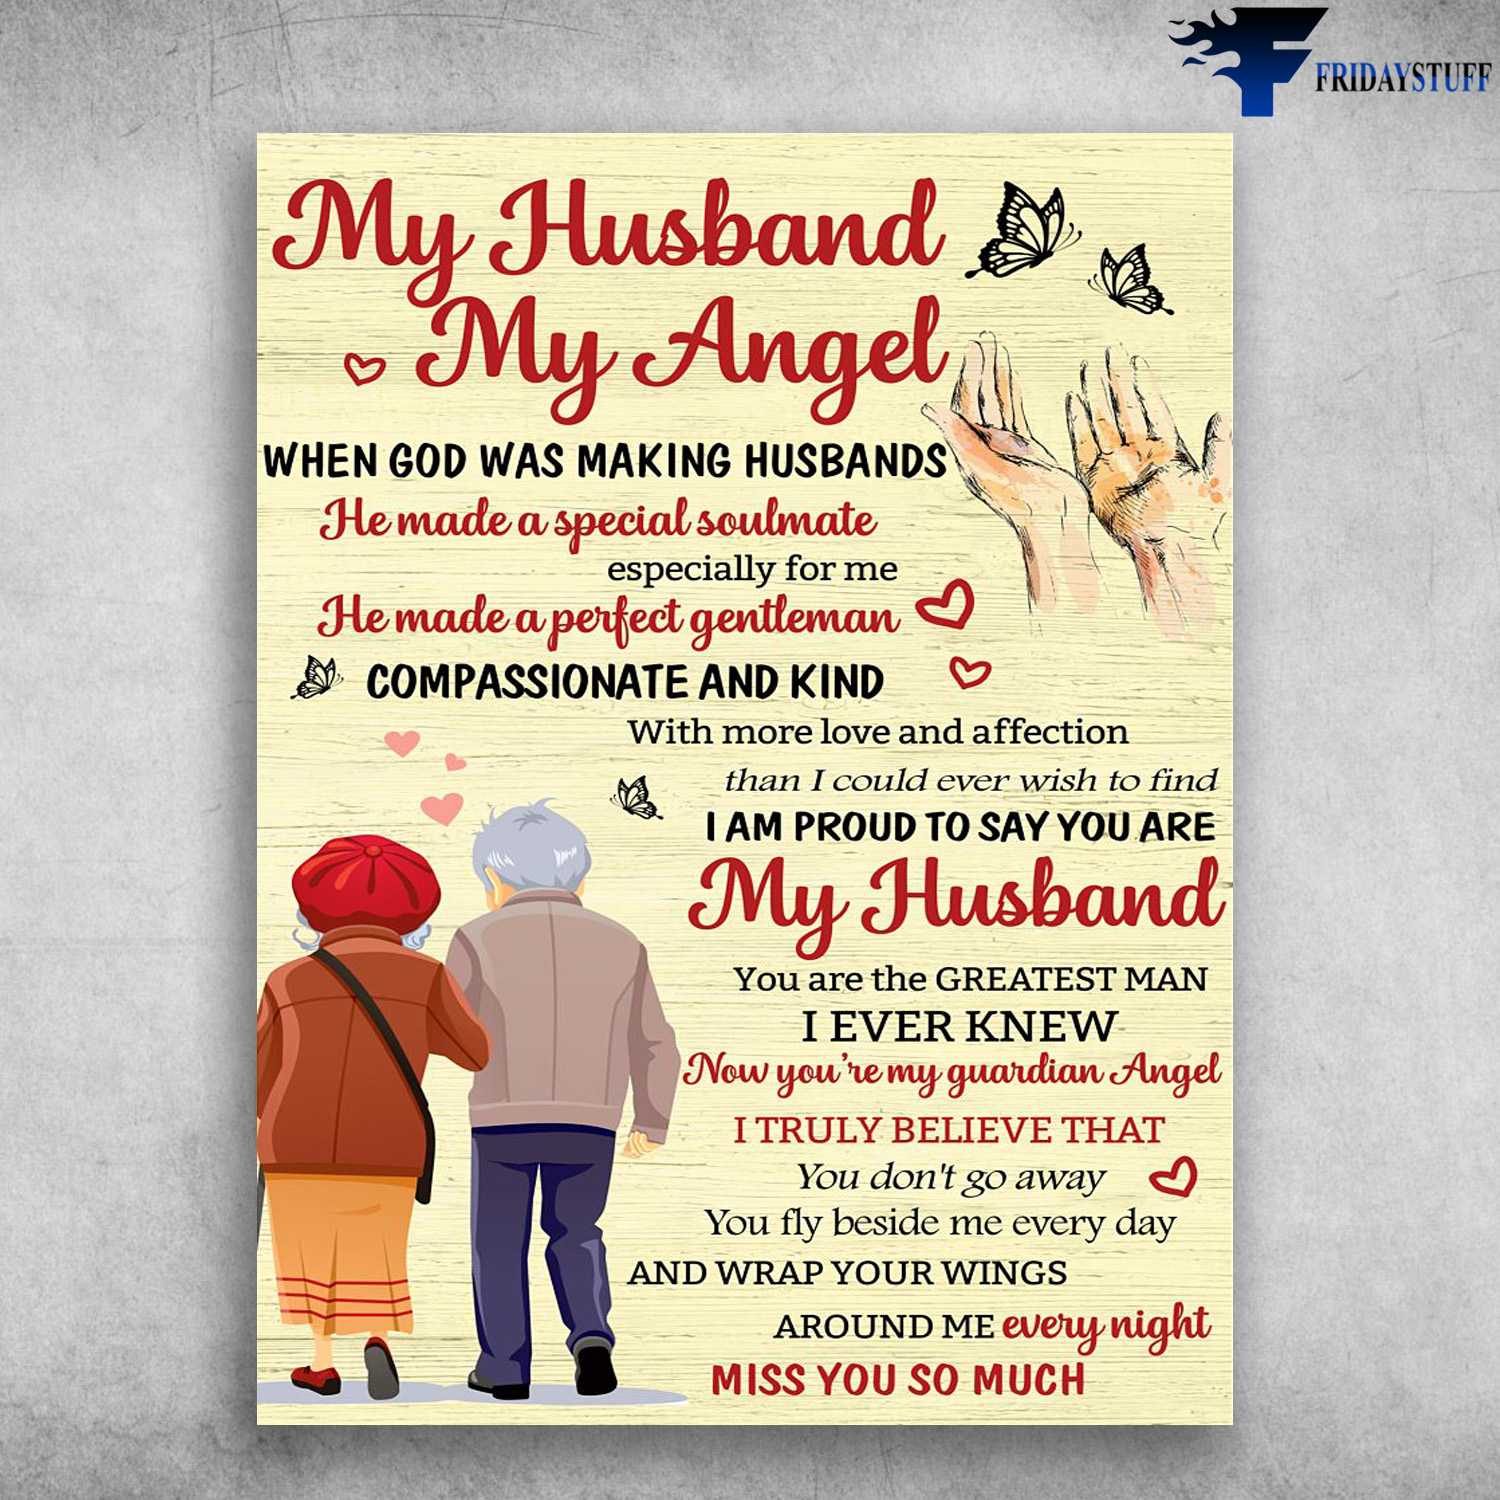 Old Couple, Beautiful Lover - My Husband, My Angel, When God Was Making Husbands, He Made A Special Soulmate, Especially For Me, Compassionate And Kind